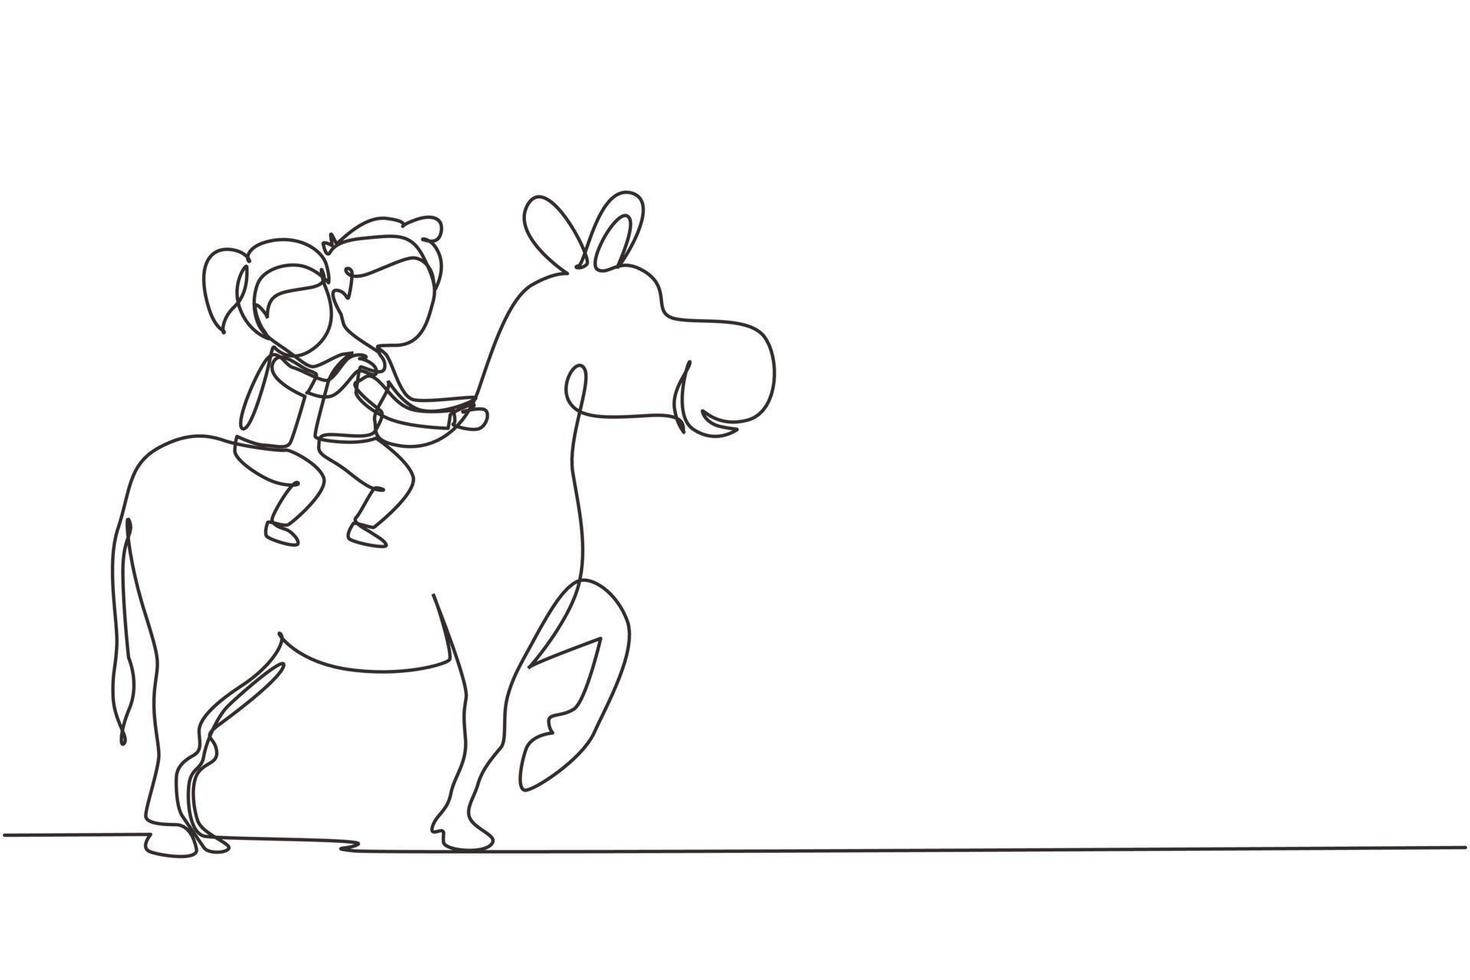 Single continuous line drawing happy cute boy and girl riding donkey together. Children sitting on back donkey with saddle in ranch park. Kids learning to ride donkey. One line draw graphic vector